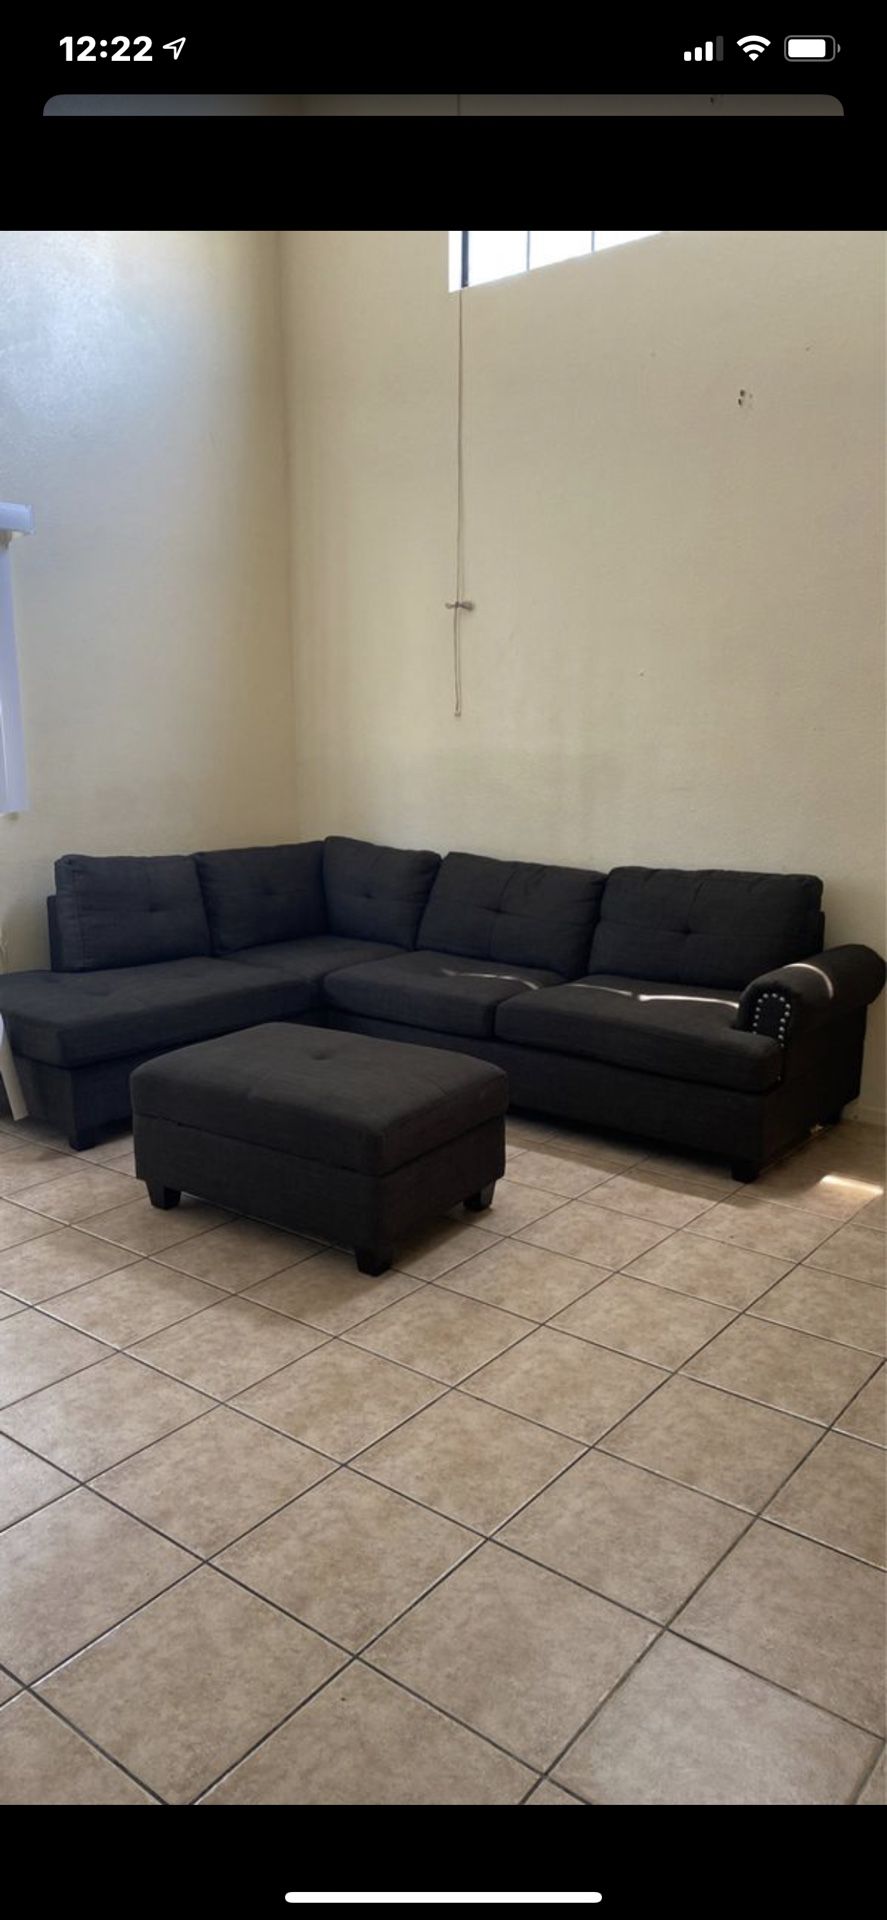 Brand new sectional couch